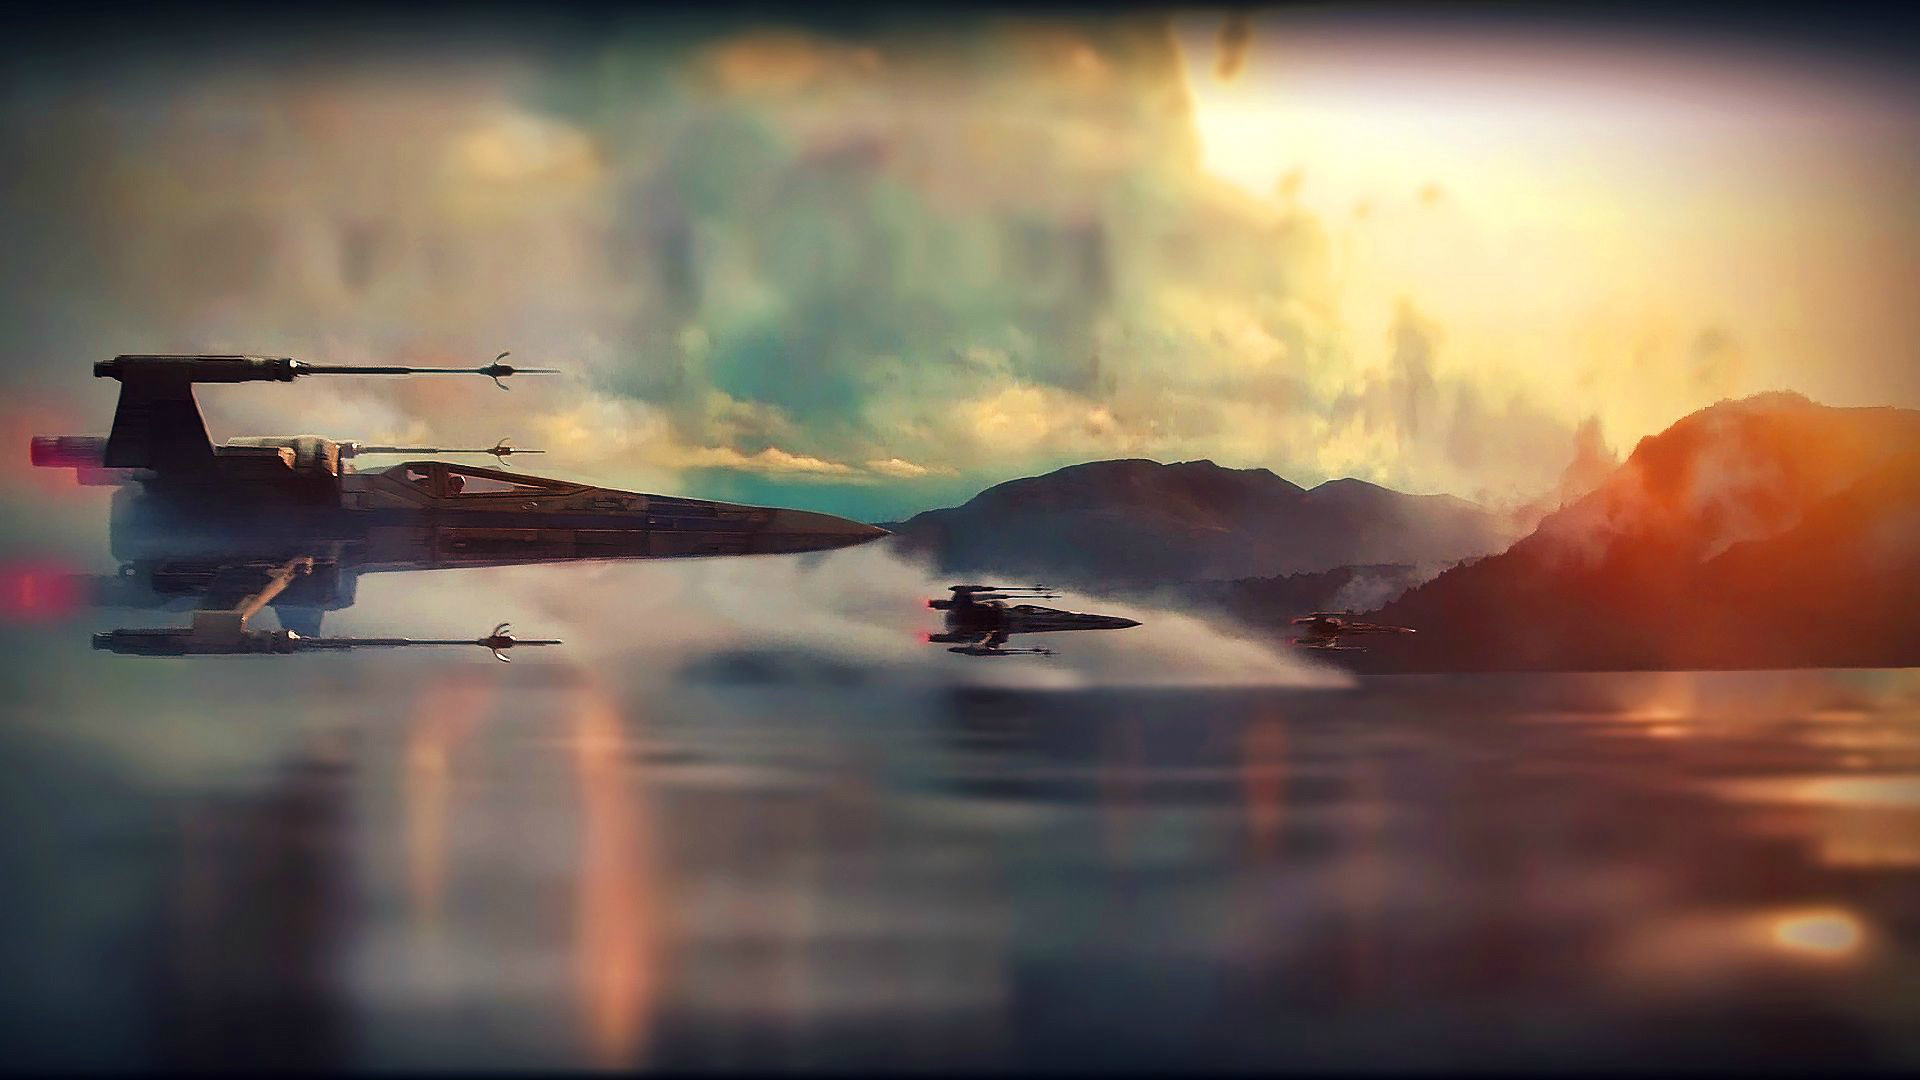 1920x1080 Related Posts. Star Wars Episode VII The Force Awakens Wallpaper ...